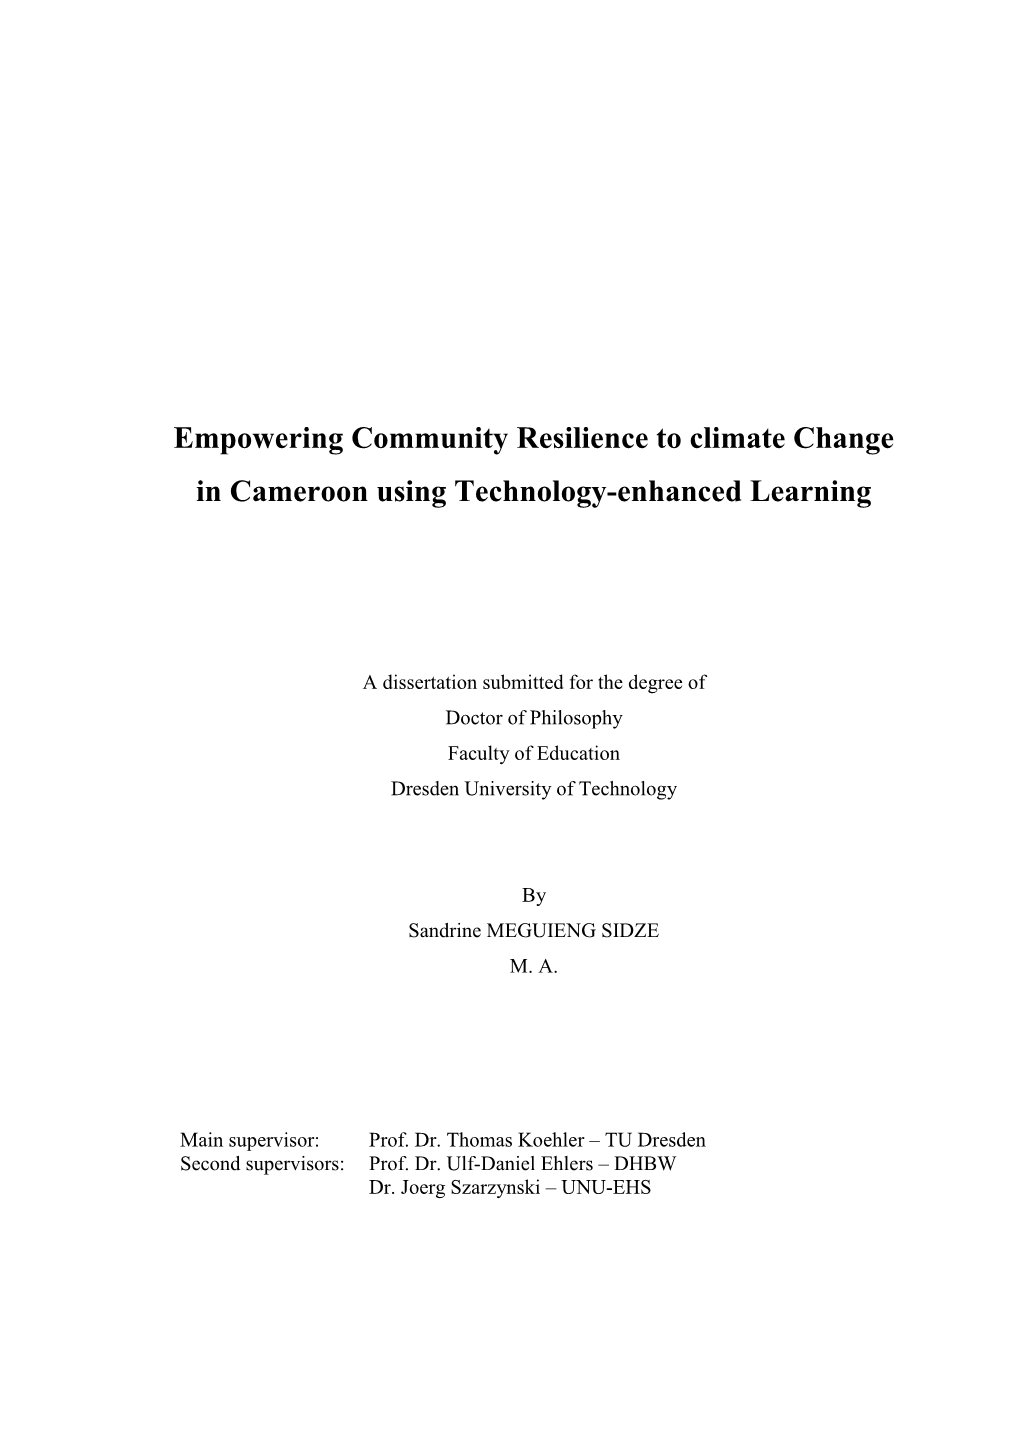 Empowering Community Resilience to Climate Change in Cameroon Using Technology-Enhanced Learning